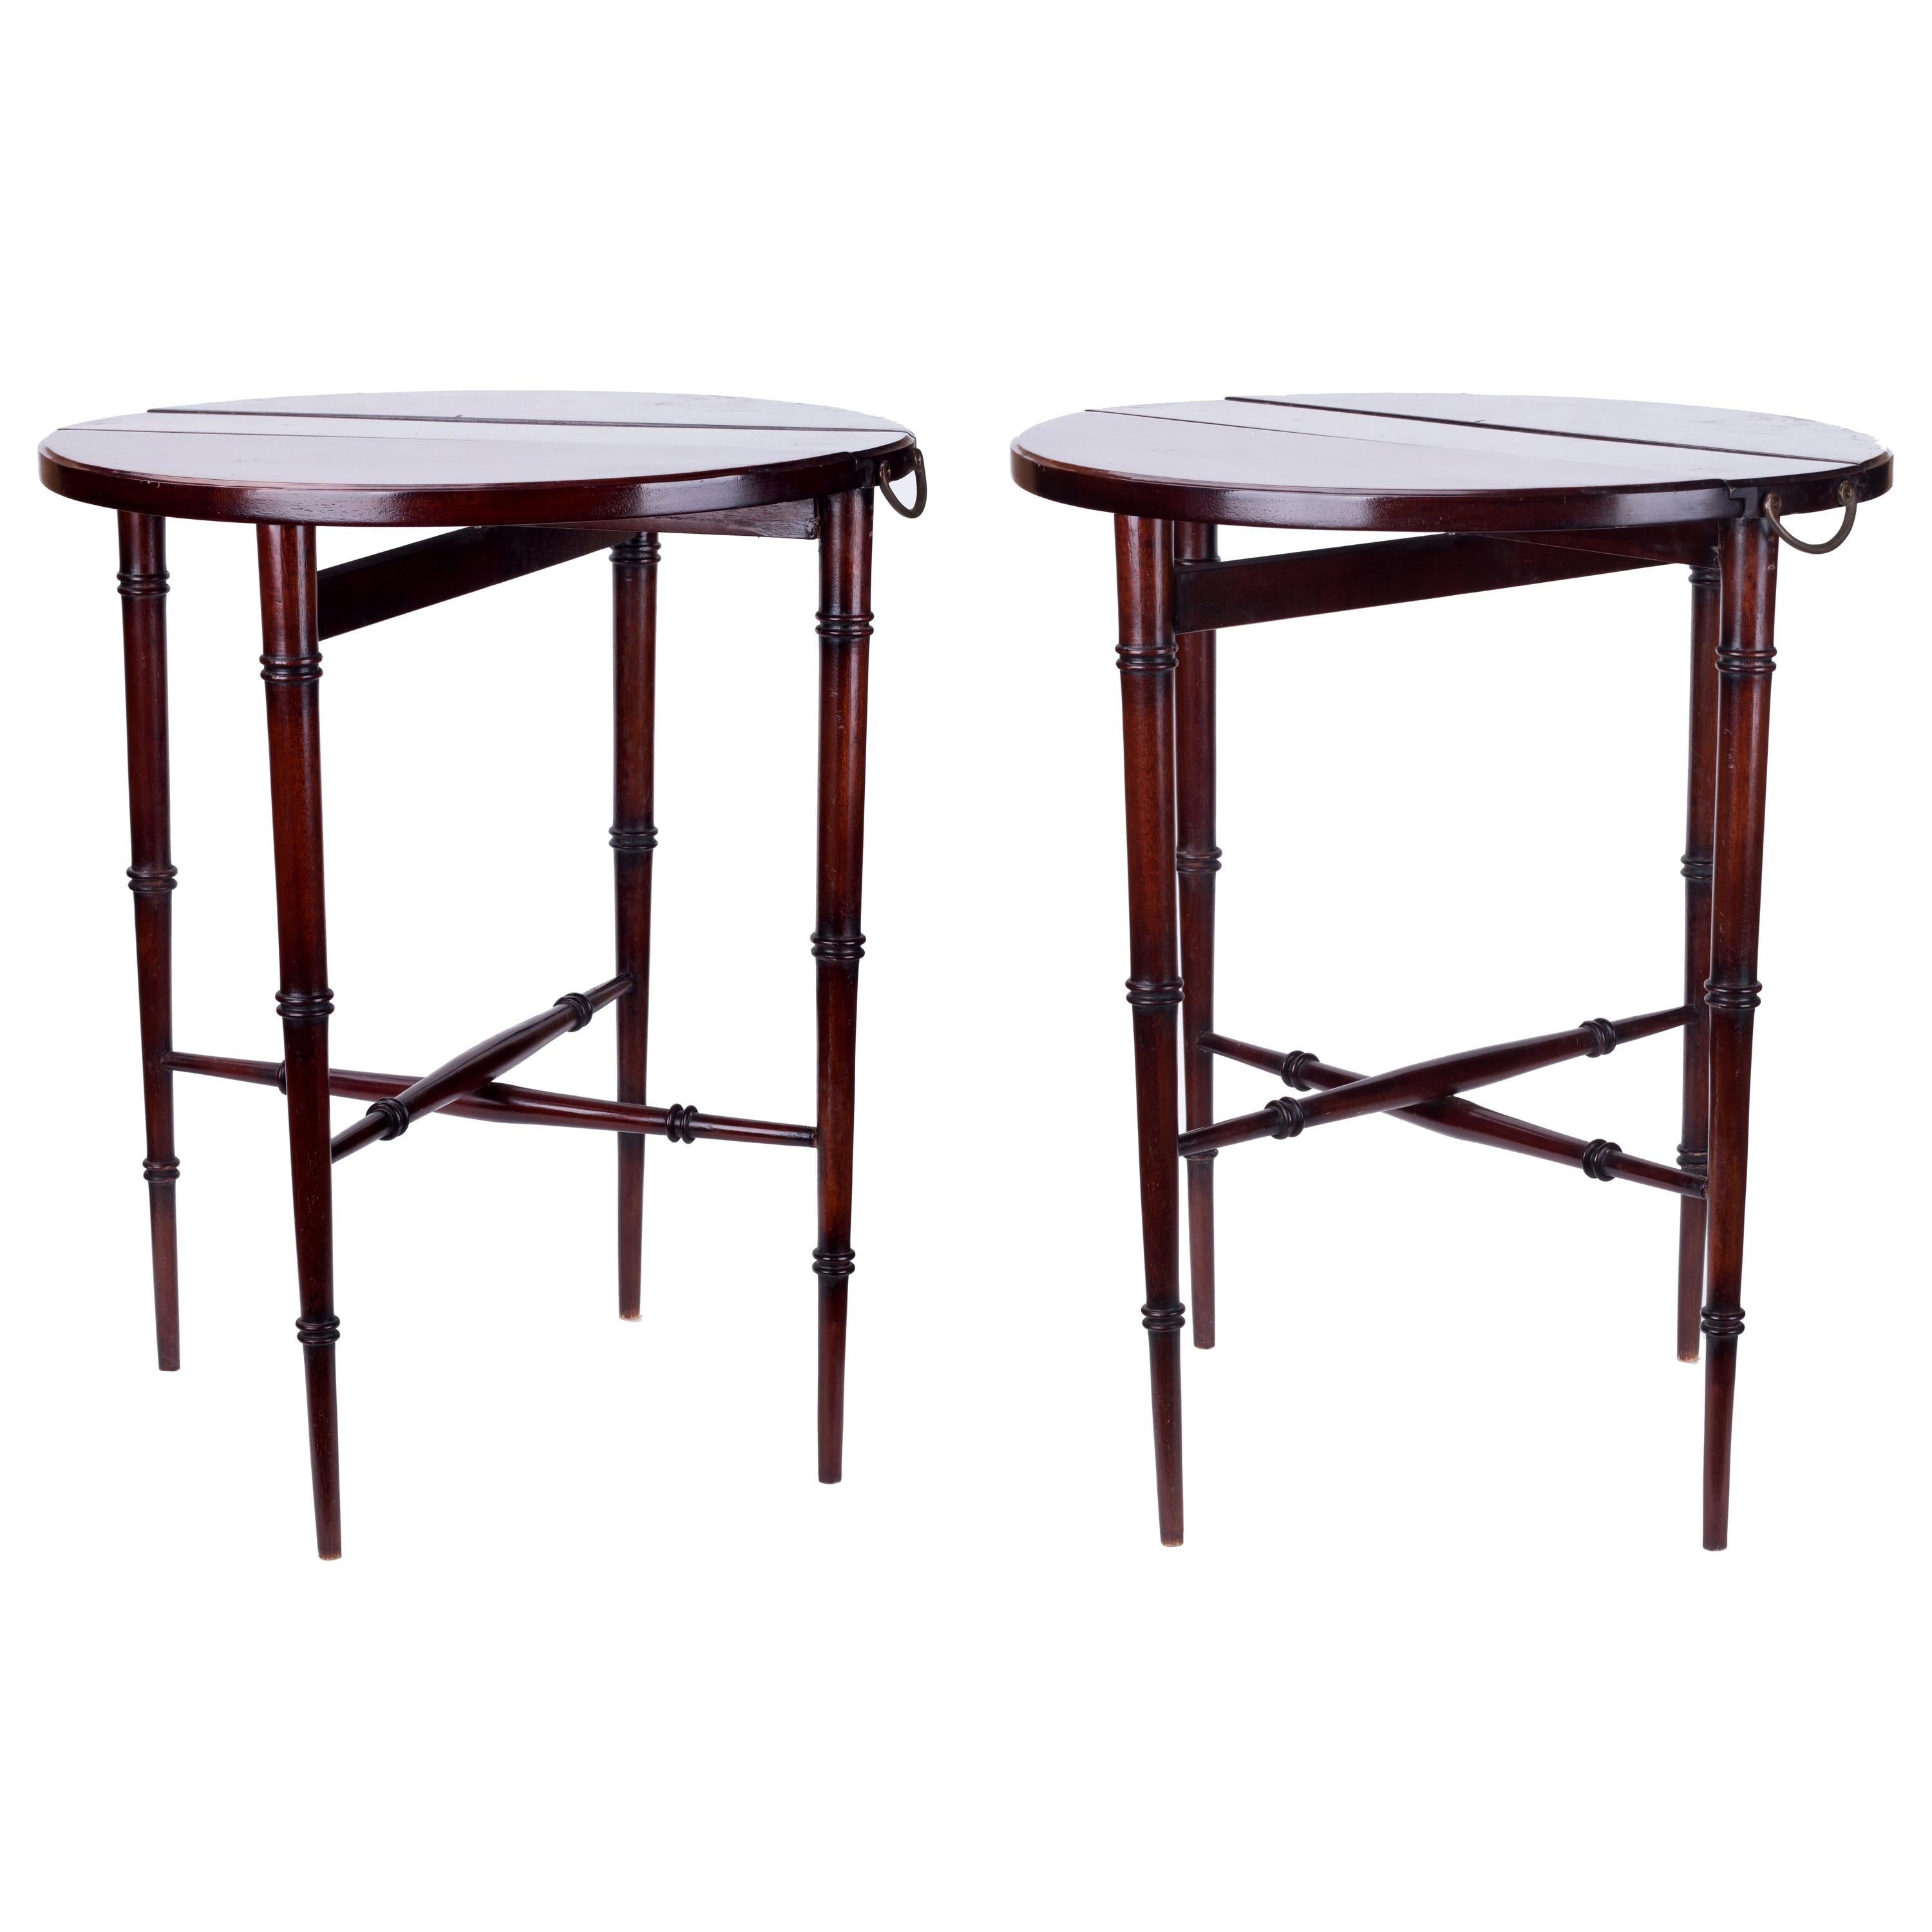 1950s English Pair of Folding Auxiliary Tables with Bronze Handles on the Sides